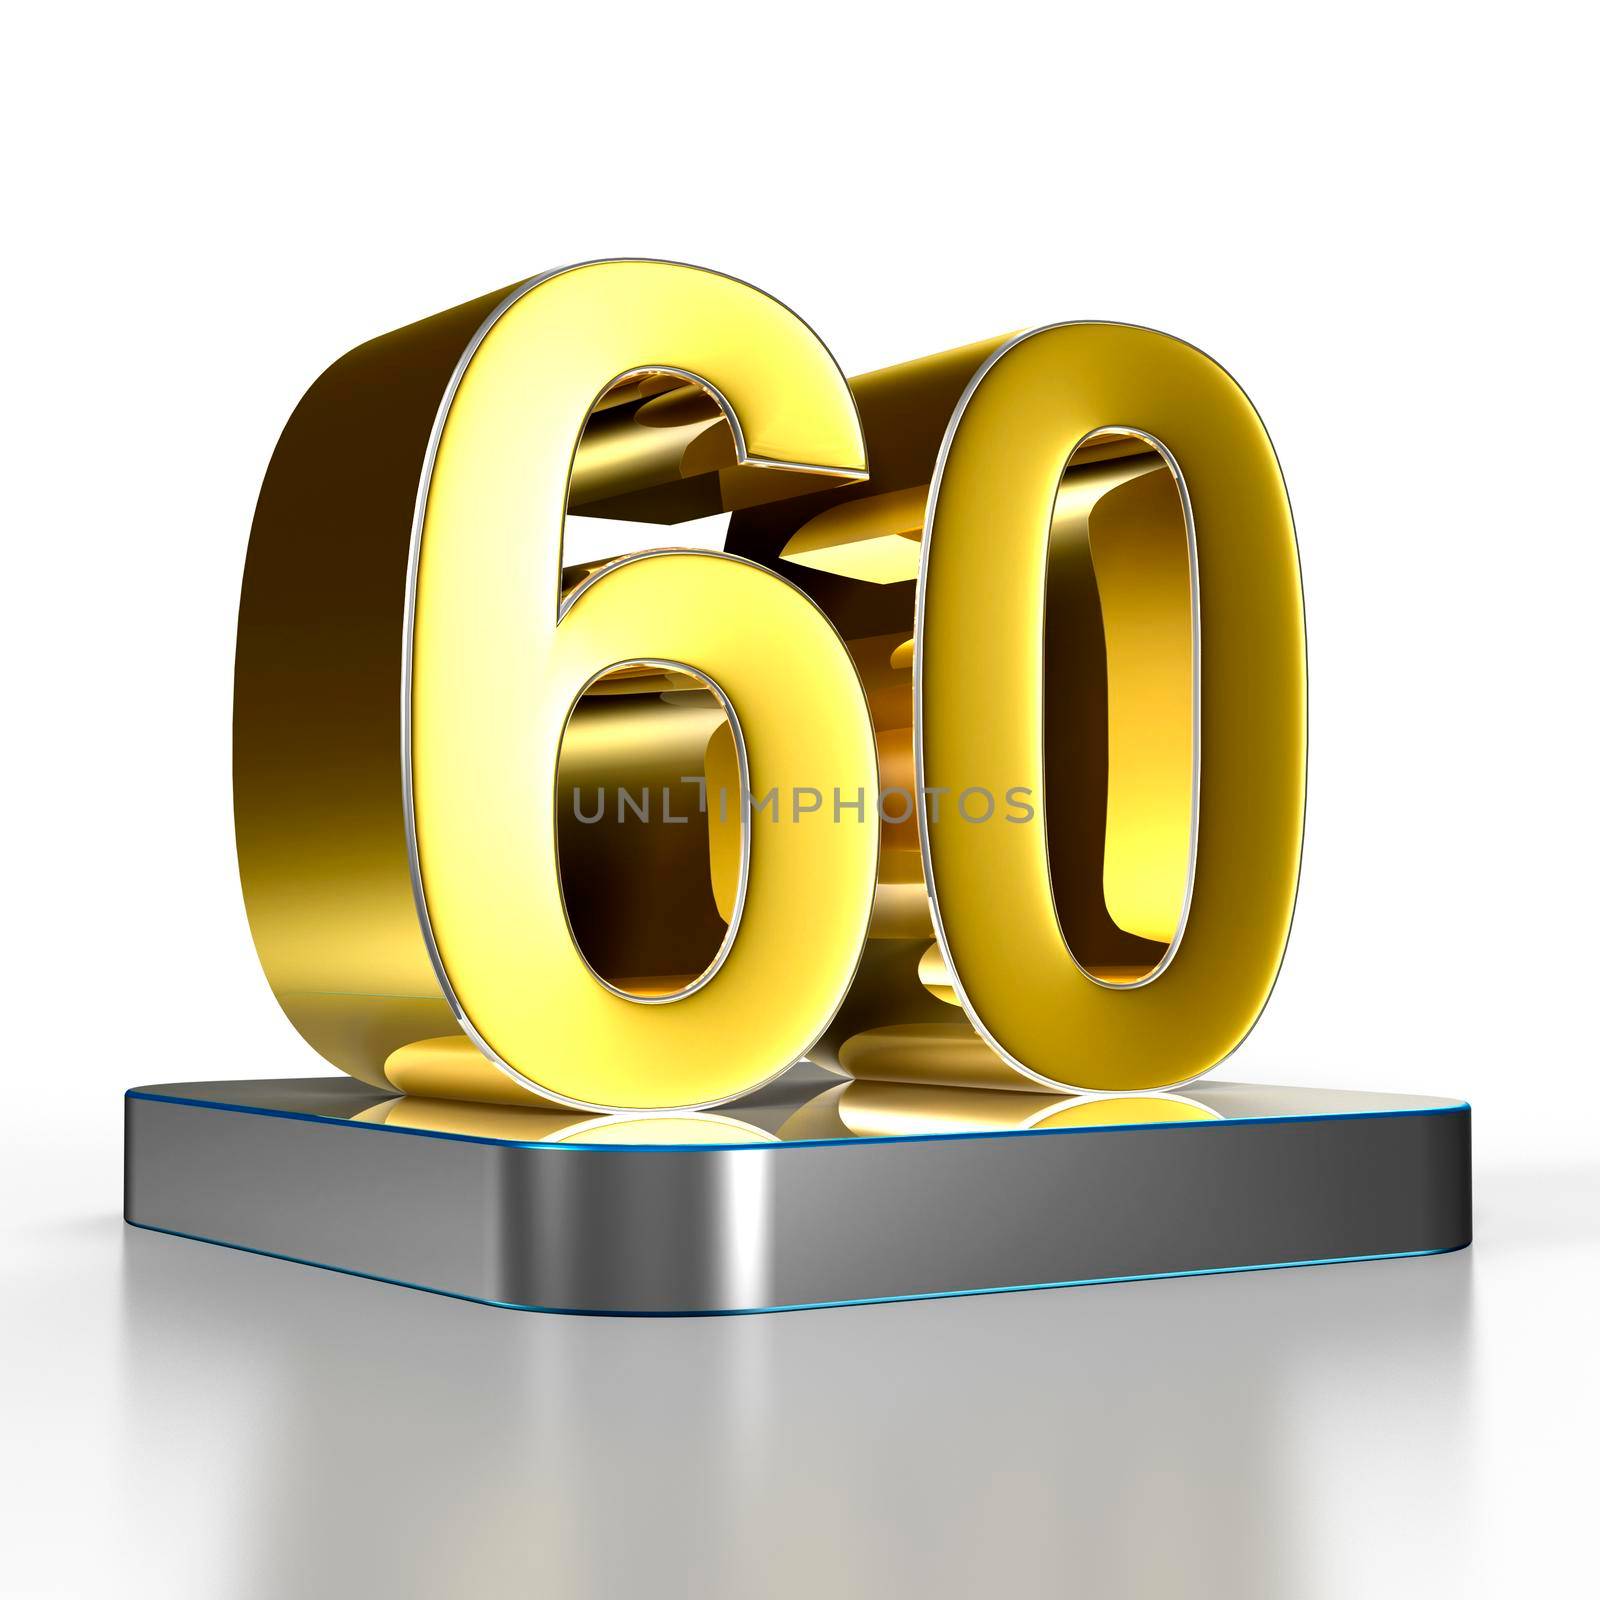 Numbers 60 gold are on a stainless steel platform illustration 3D rendering with clipping path. by thitimontoyai